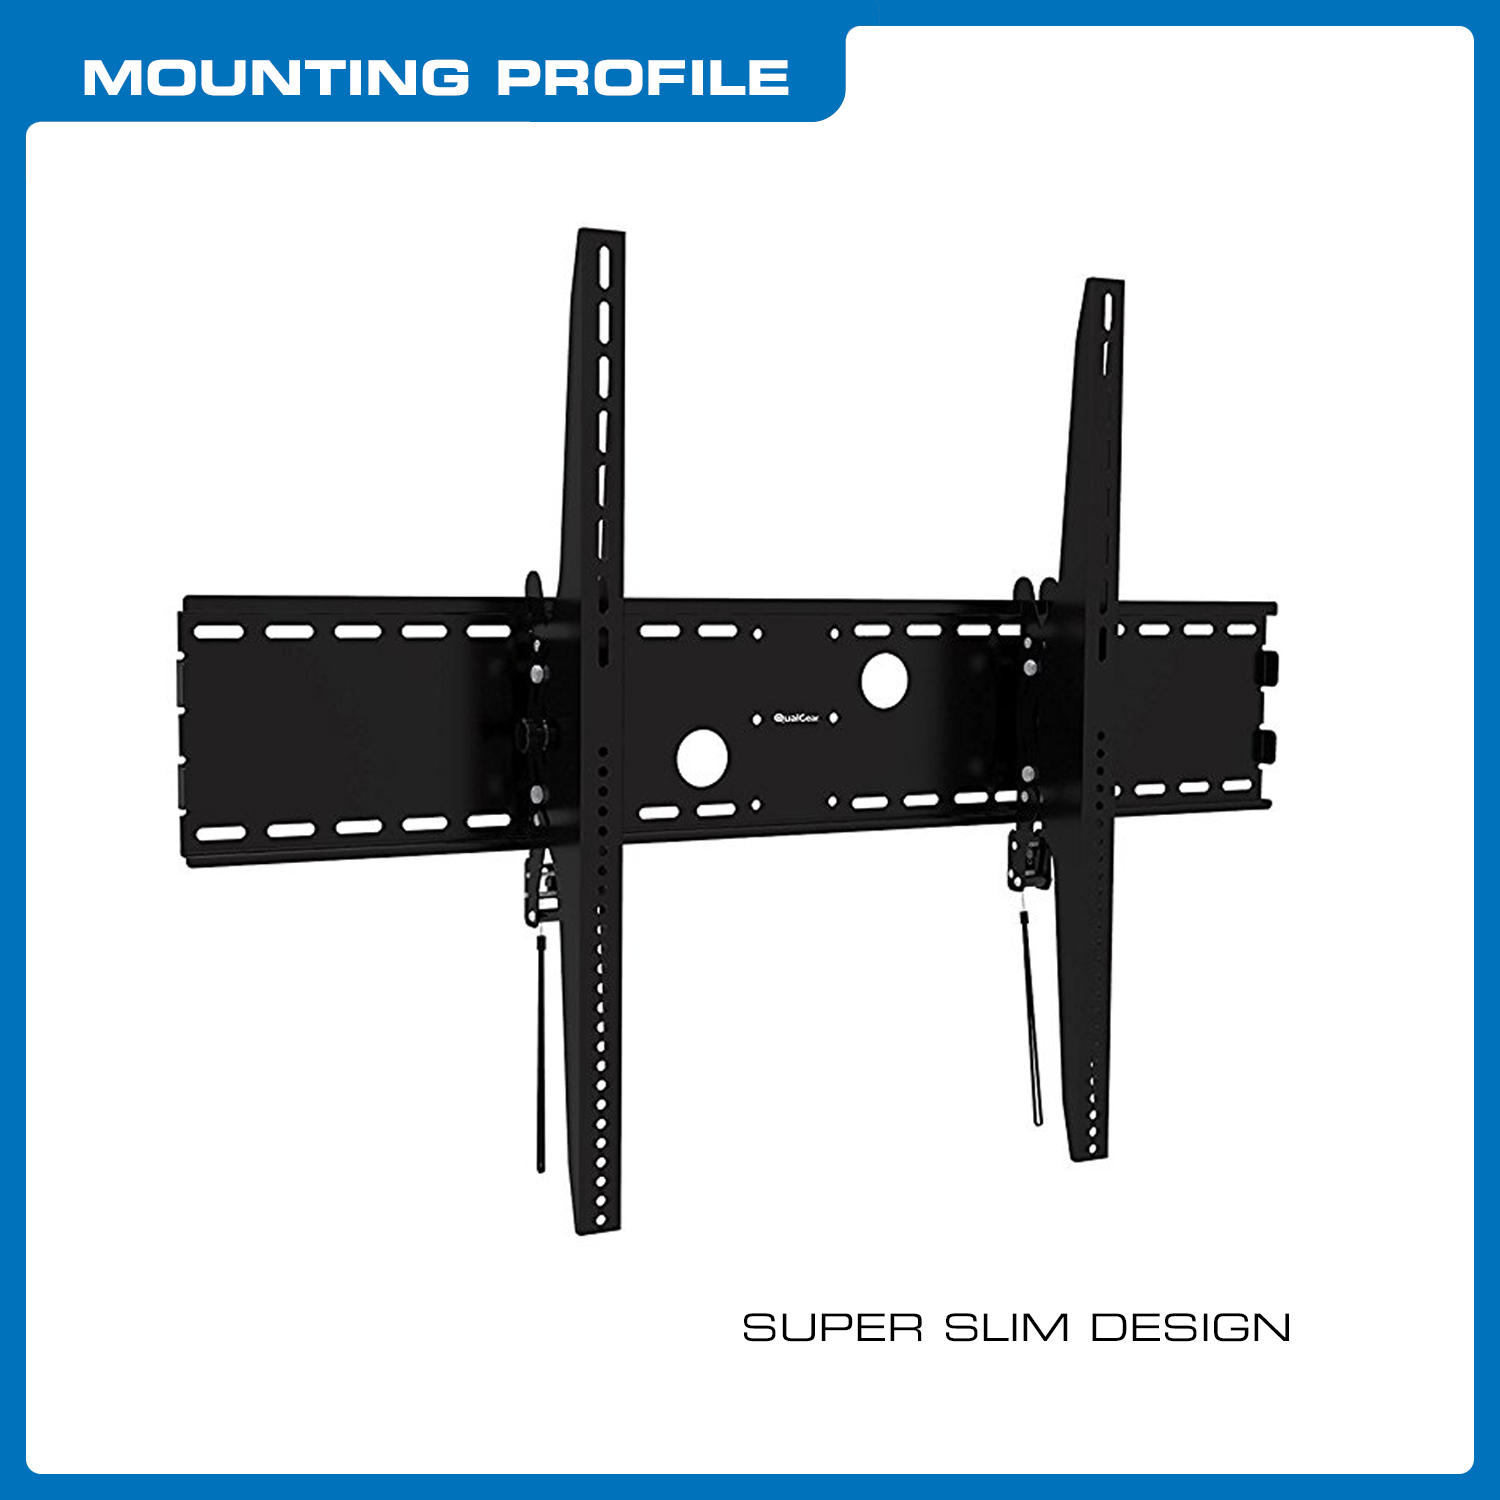 QualGear Heavy Duty Tilting TV Wall Mount For 60-100 Inch Flat Panel and Curved TVs, Black (QG-TM-091-BLK) [UL Listed]